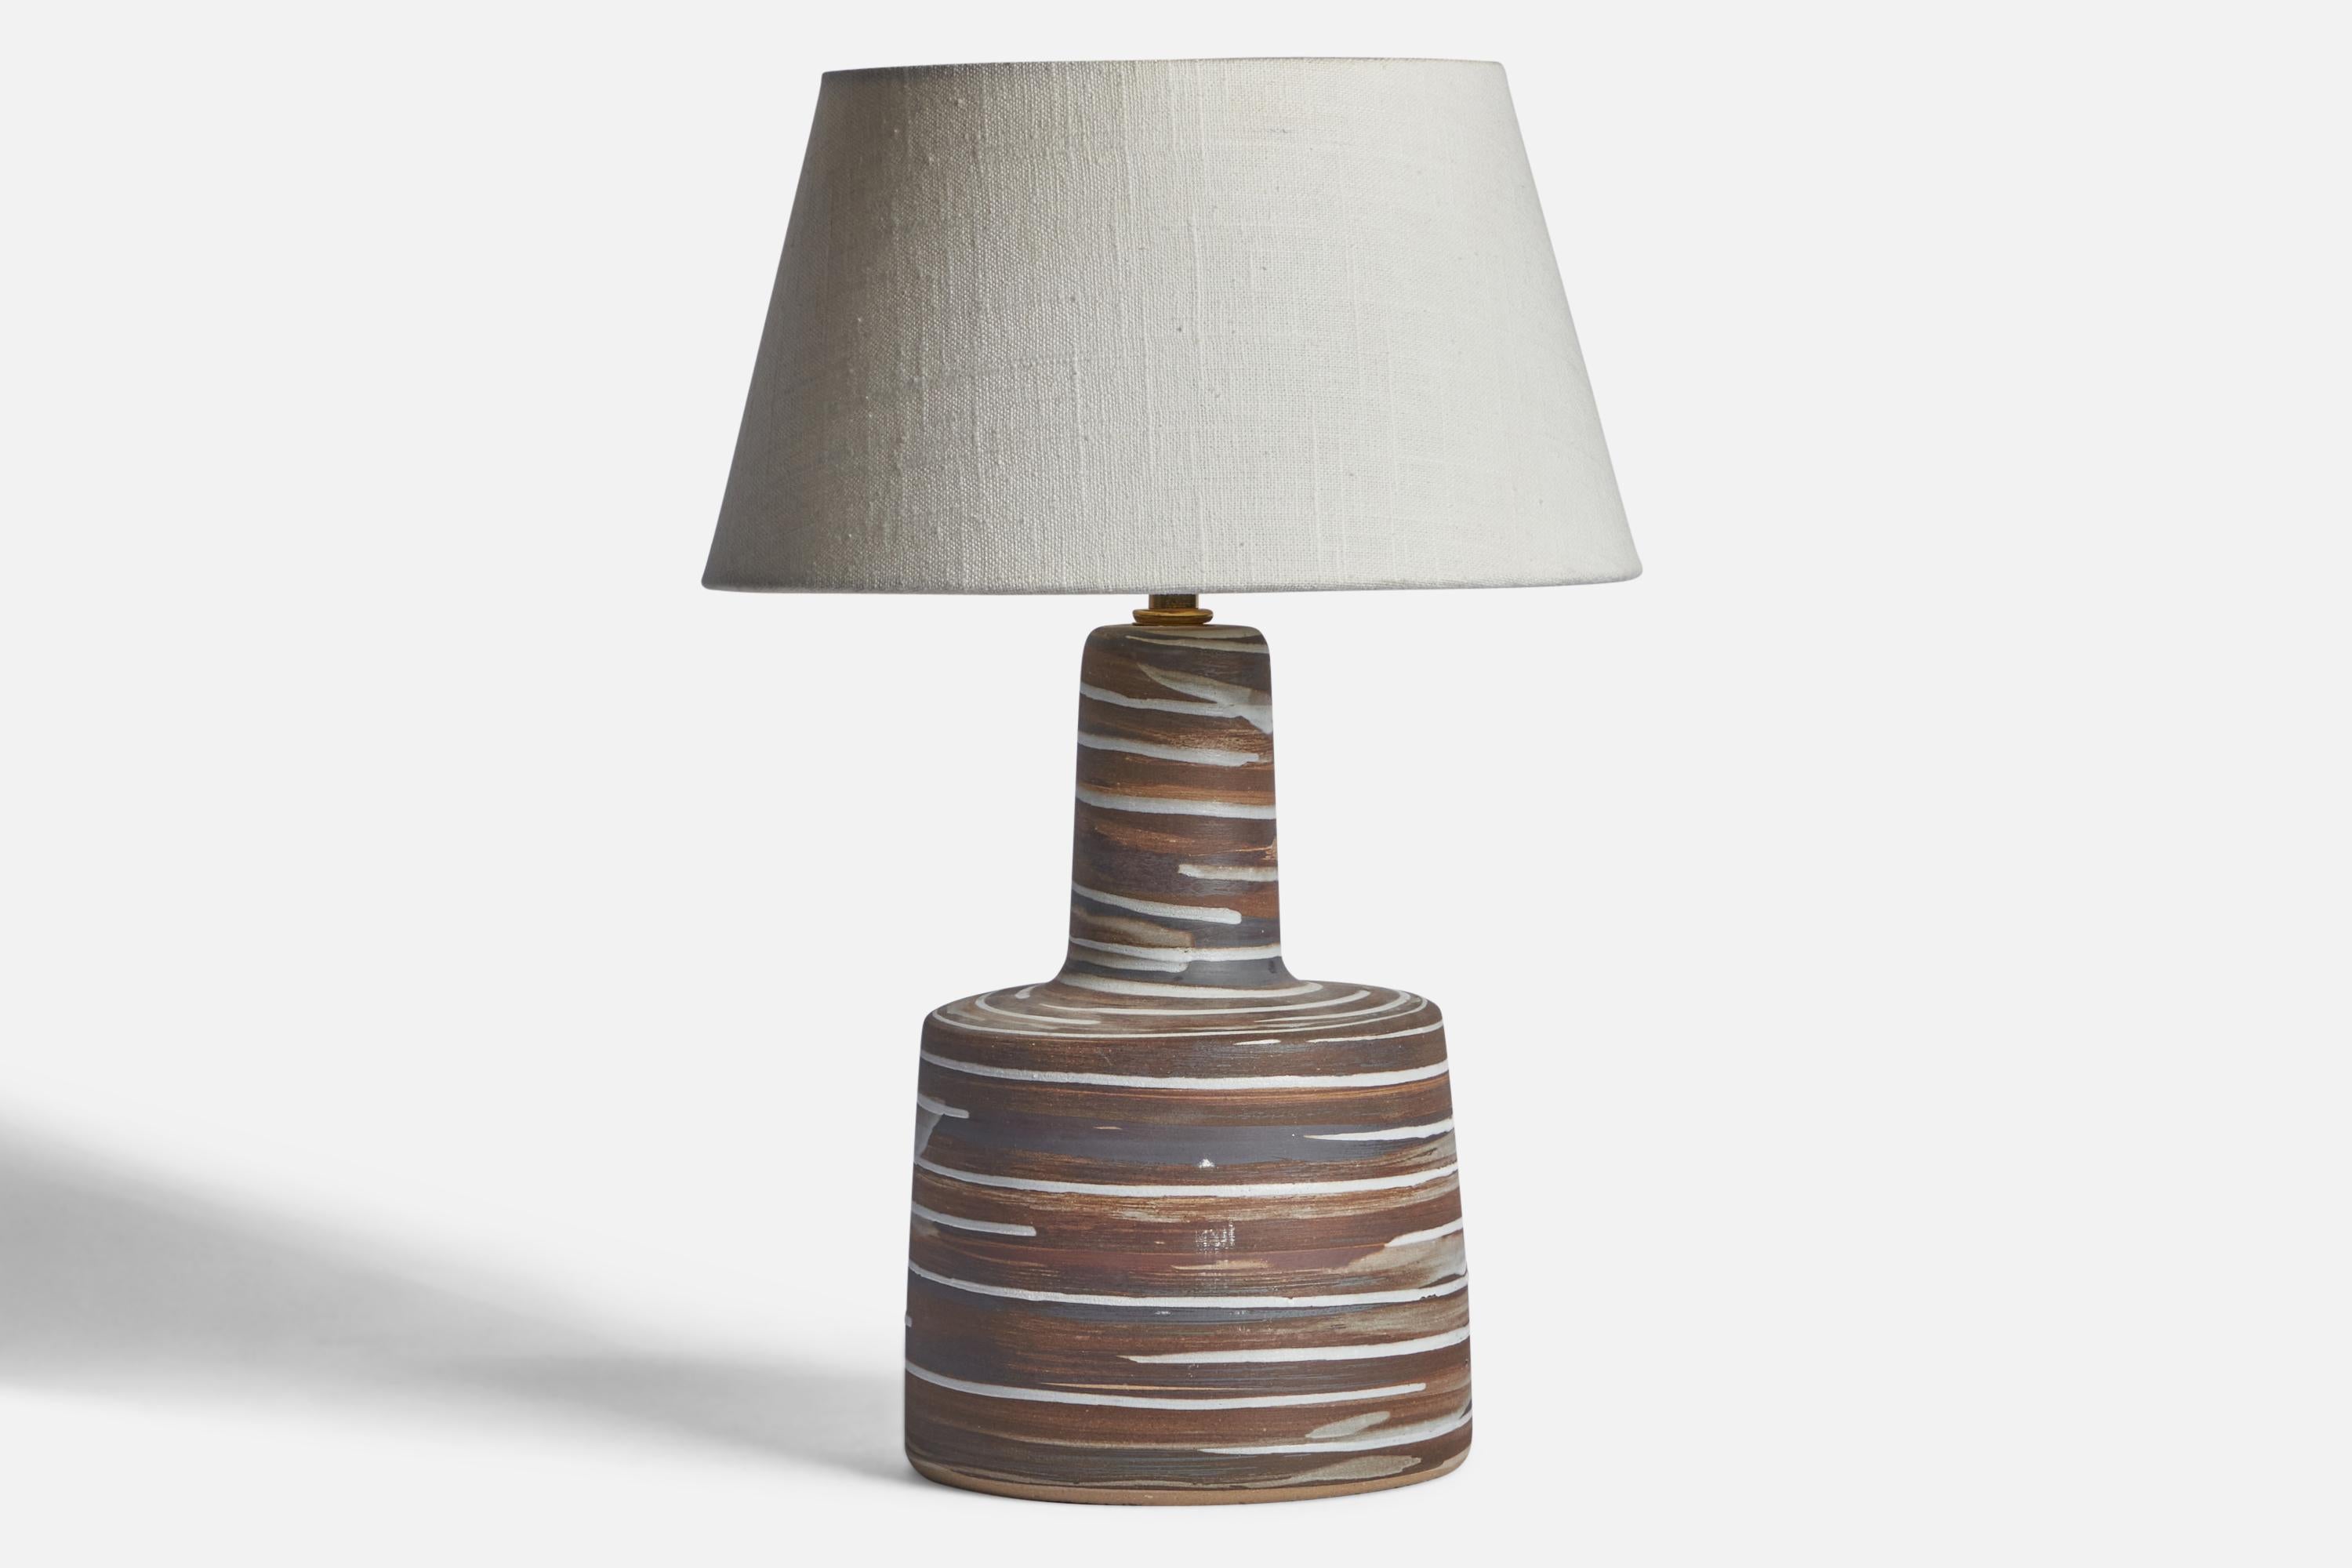 An grey and brown-glazed ceramic table lamp designed by Jane & Gordon Martz and produced by Marshall Studios, USA, 1960s.

Dimensions of Lamp (inches): 11.9” H x 6.15” Diameter
Dimensions of Shade (inches): 7” Top Diameter x 10” Bottom Diameter x